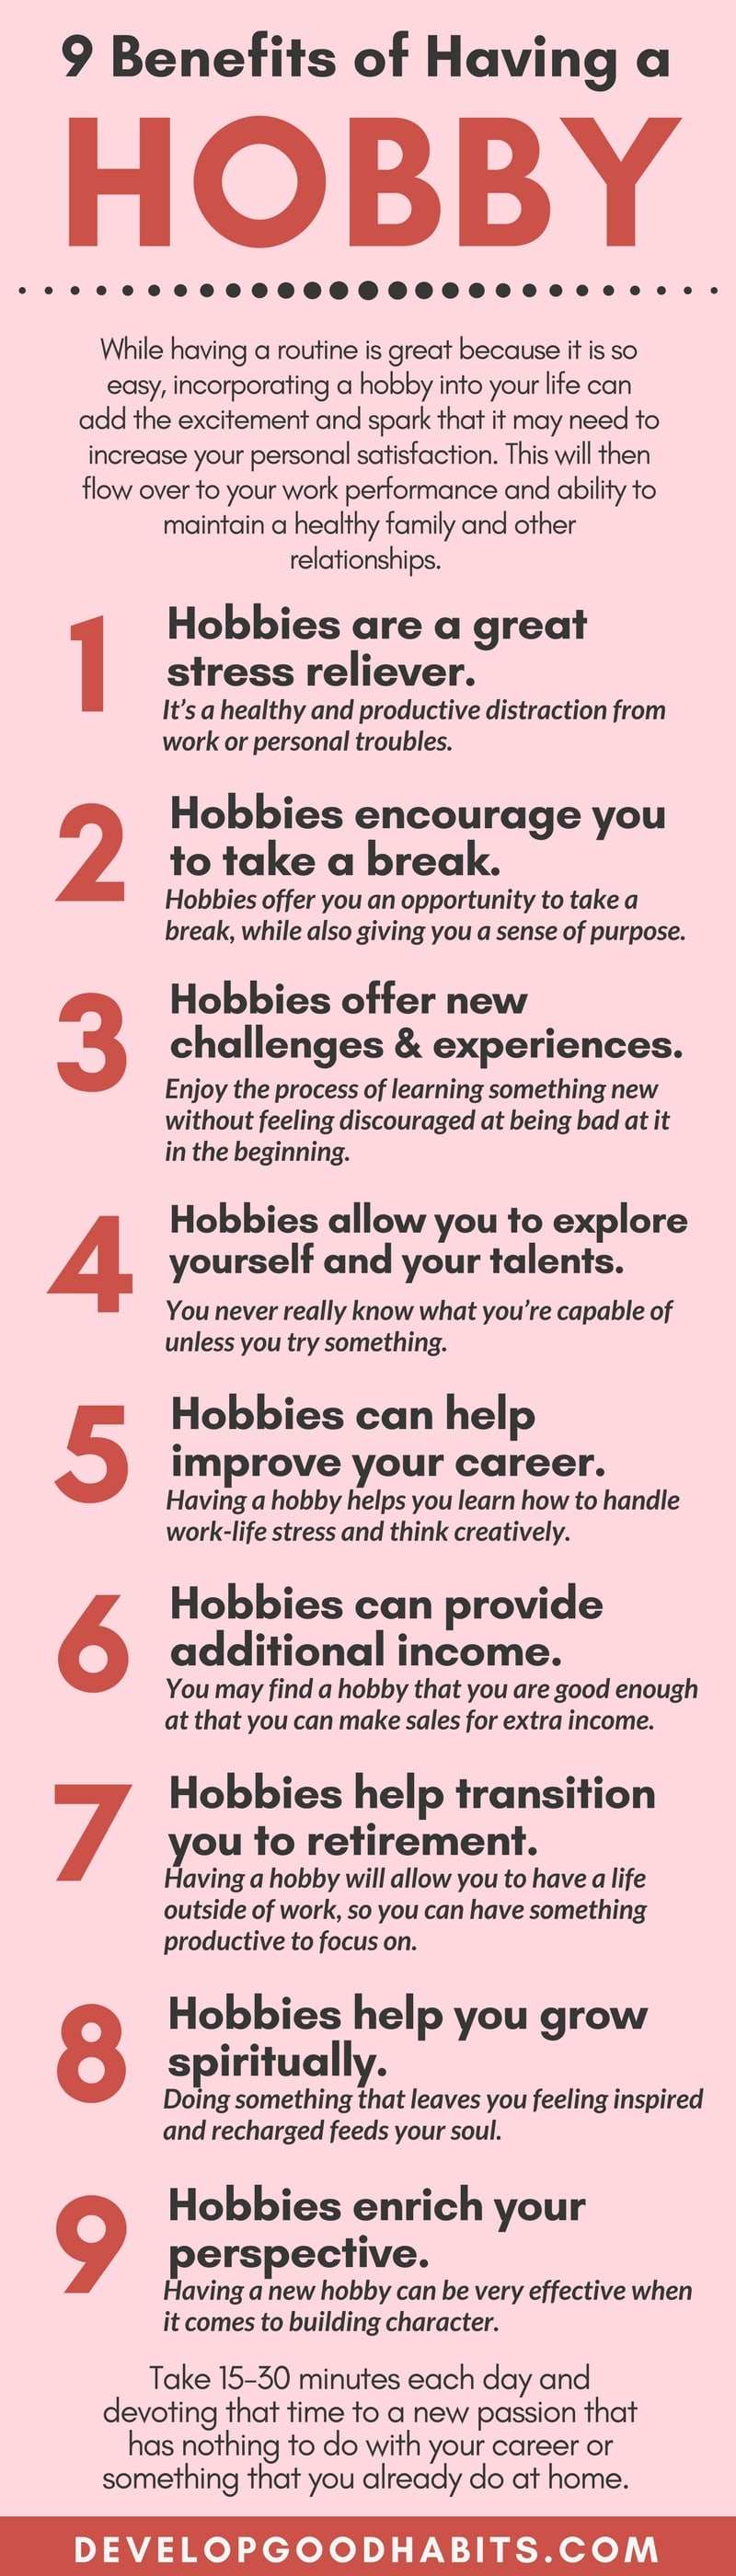 Read the rest of the post about 22 Benefits of Having a Hobby or Enjoying a Leisure Activity. Learn about the different ways that having a hobby can improve your life.  #mentalhealth #longevity #personalgrowth #healthylifestyle #personaldevelopment #psychology #healthyhabits